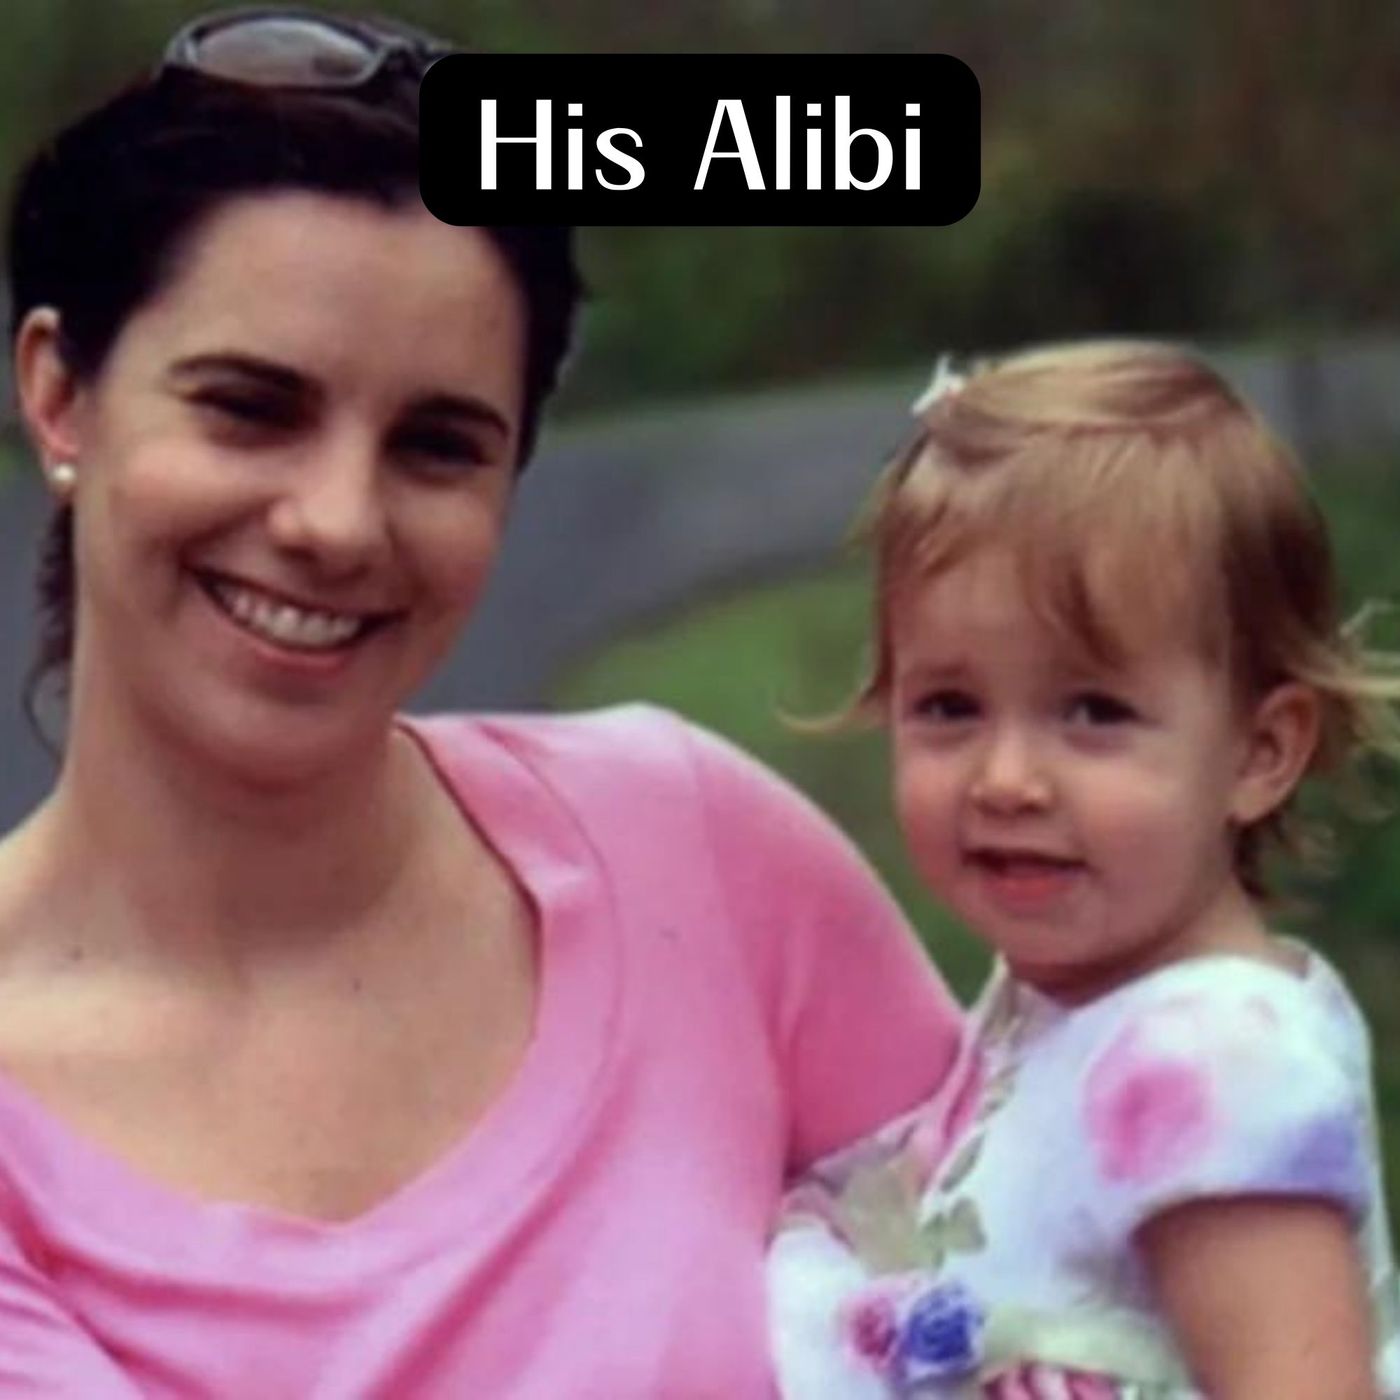 His Alibi: The Murder of Michelle Young